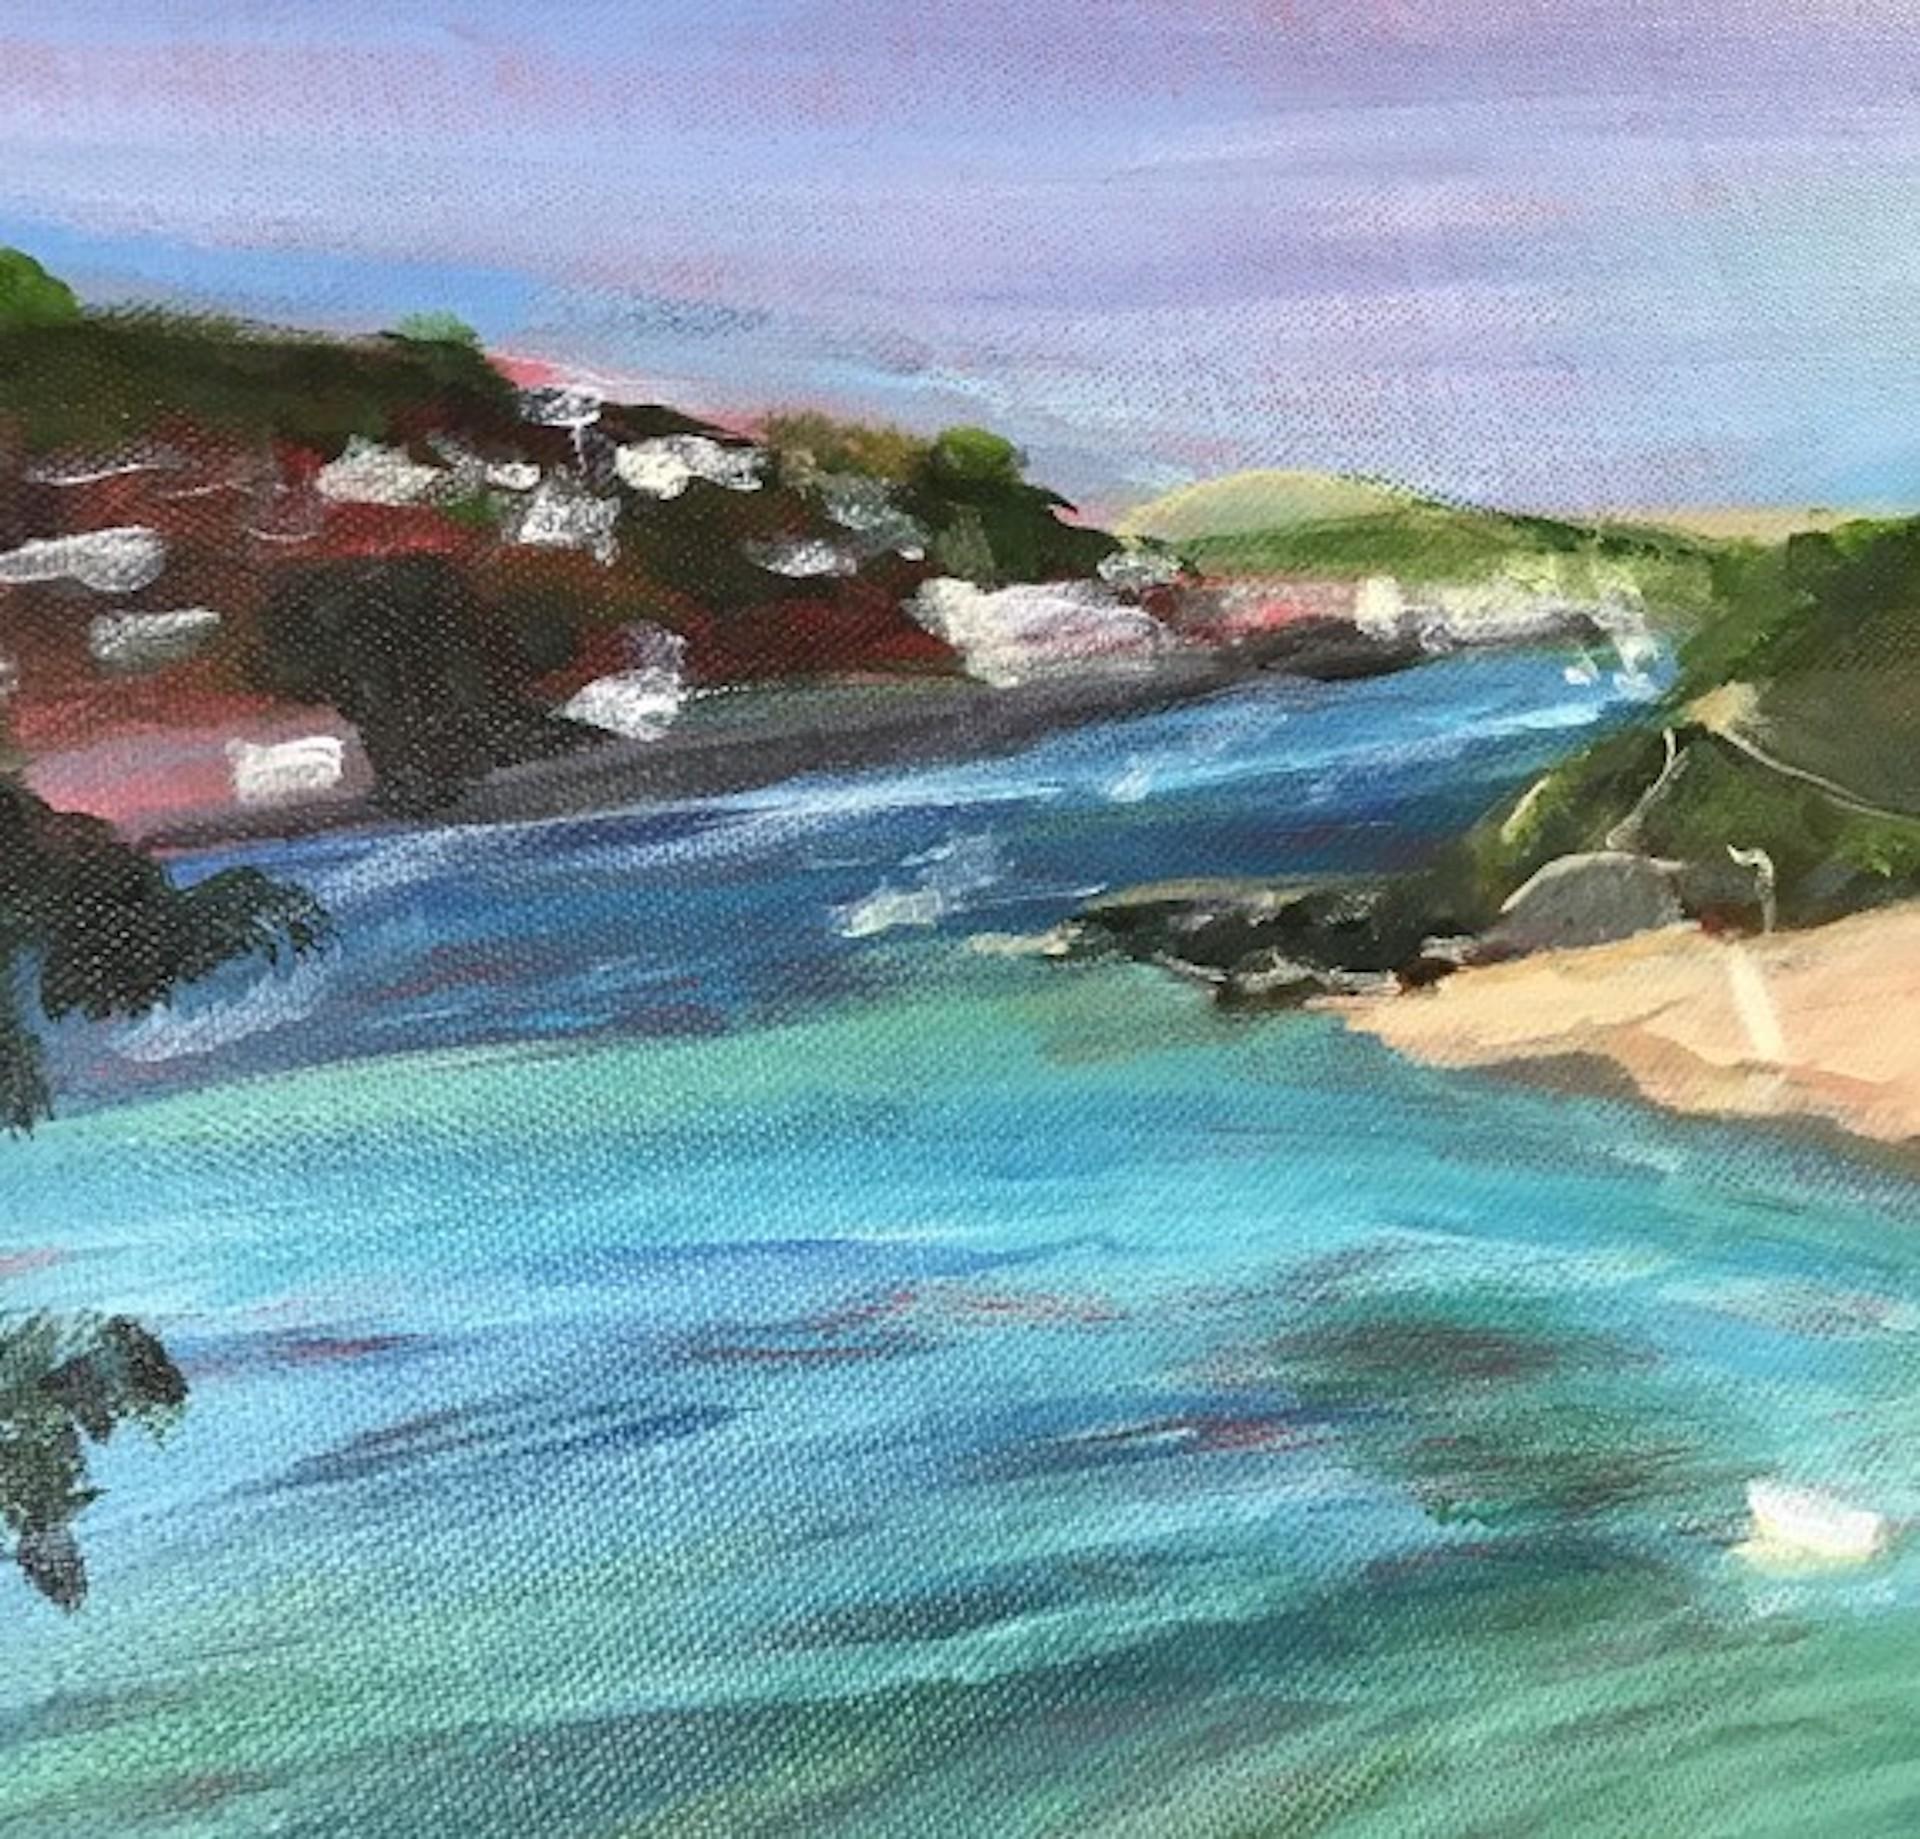 Peri Taylor This view of Sunny Cove, looking towards Salcombe is one of my favourite views. On this particular summer day last year the sea was an exotic blue and very enticing.
Peri Taylor is available at Wychwood Art online and in our gallery.